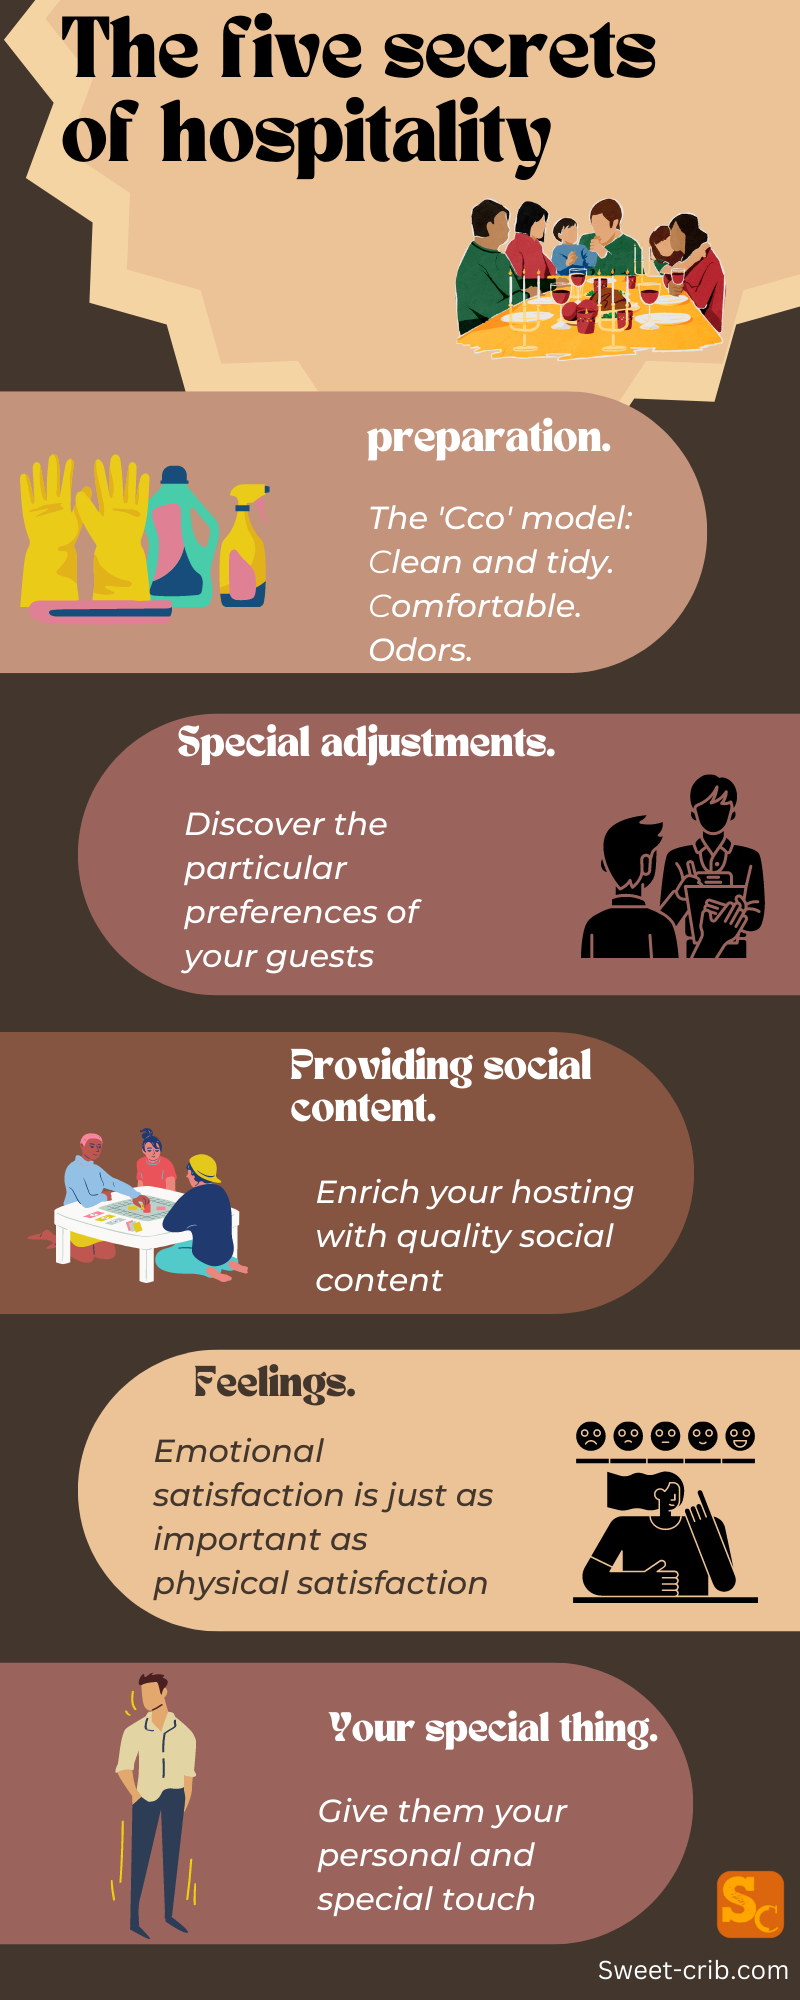 Infographic for secrets of hospitality